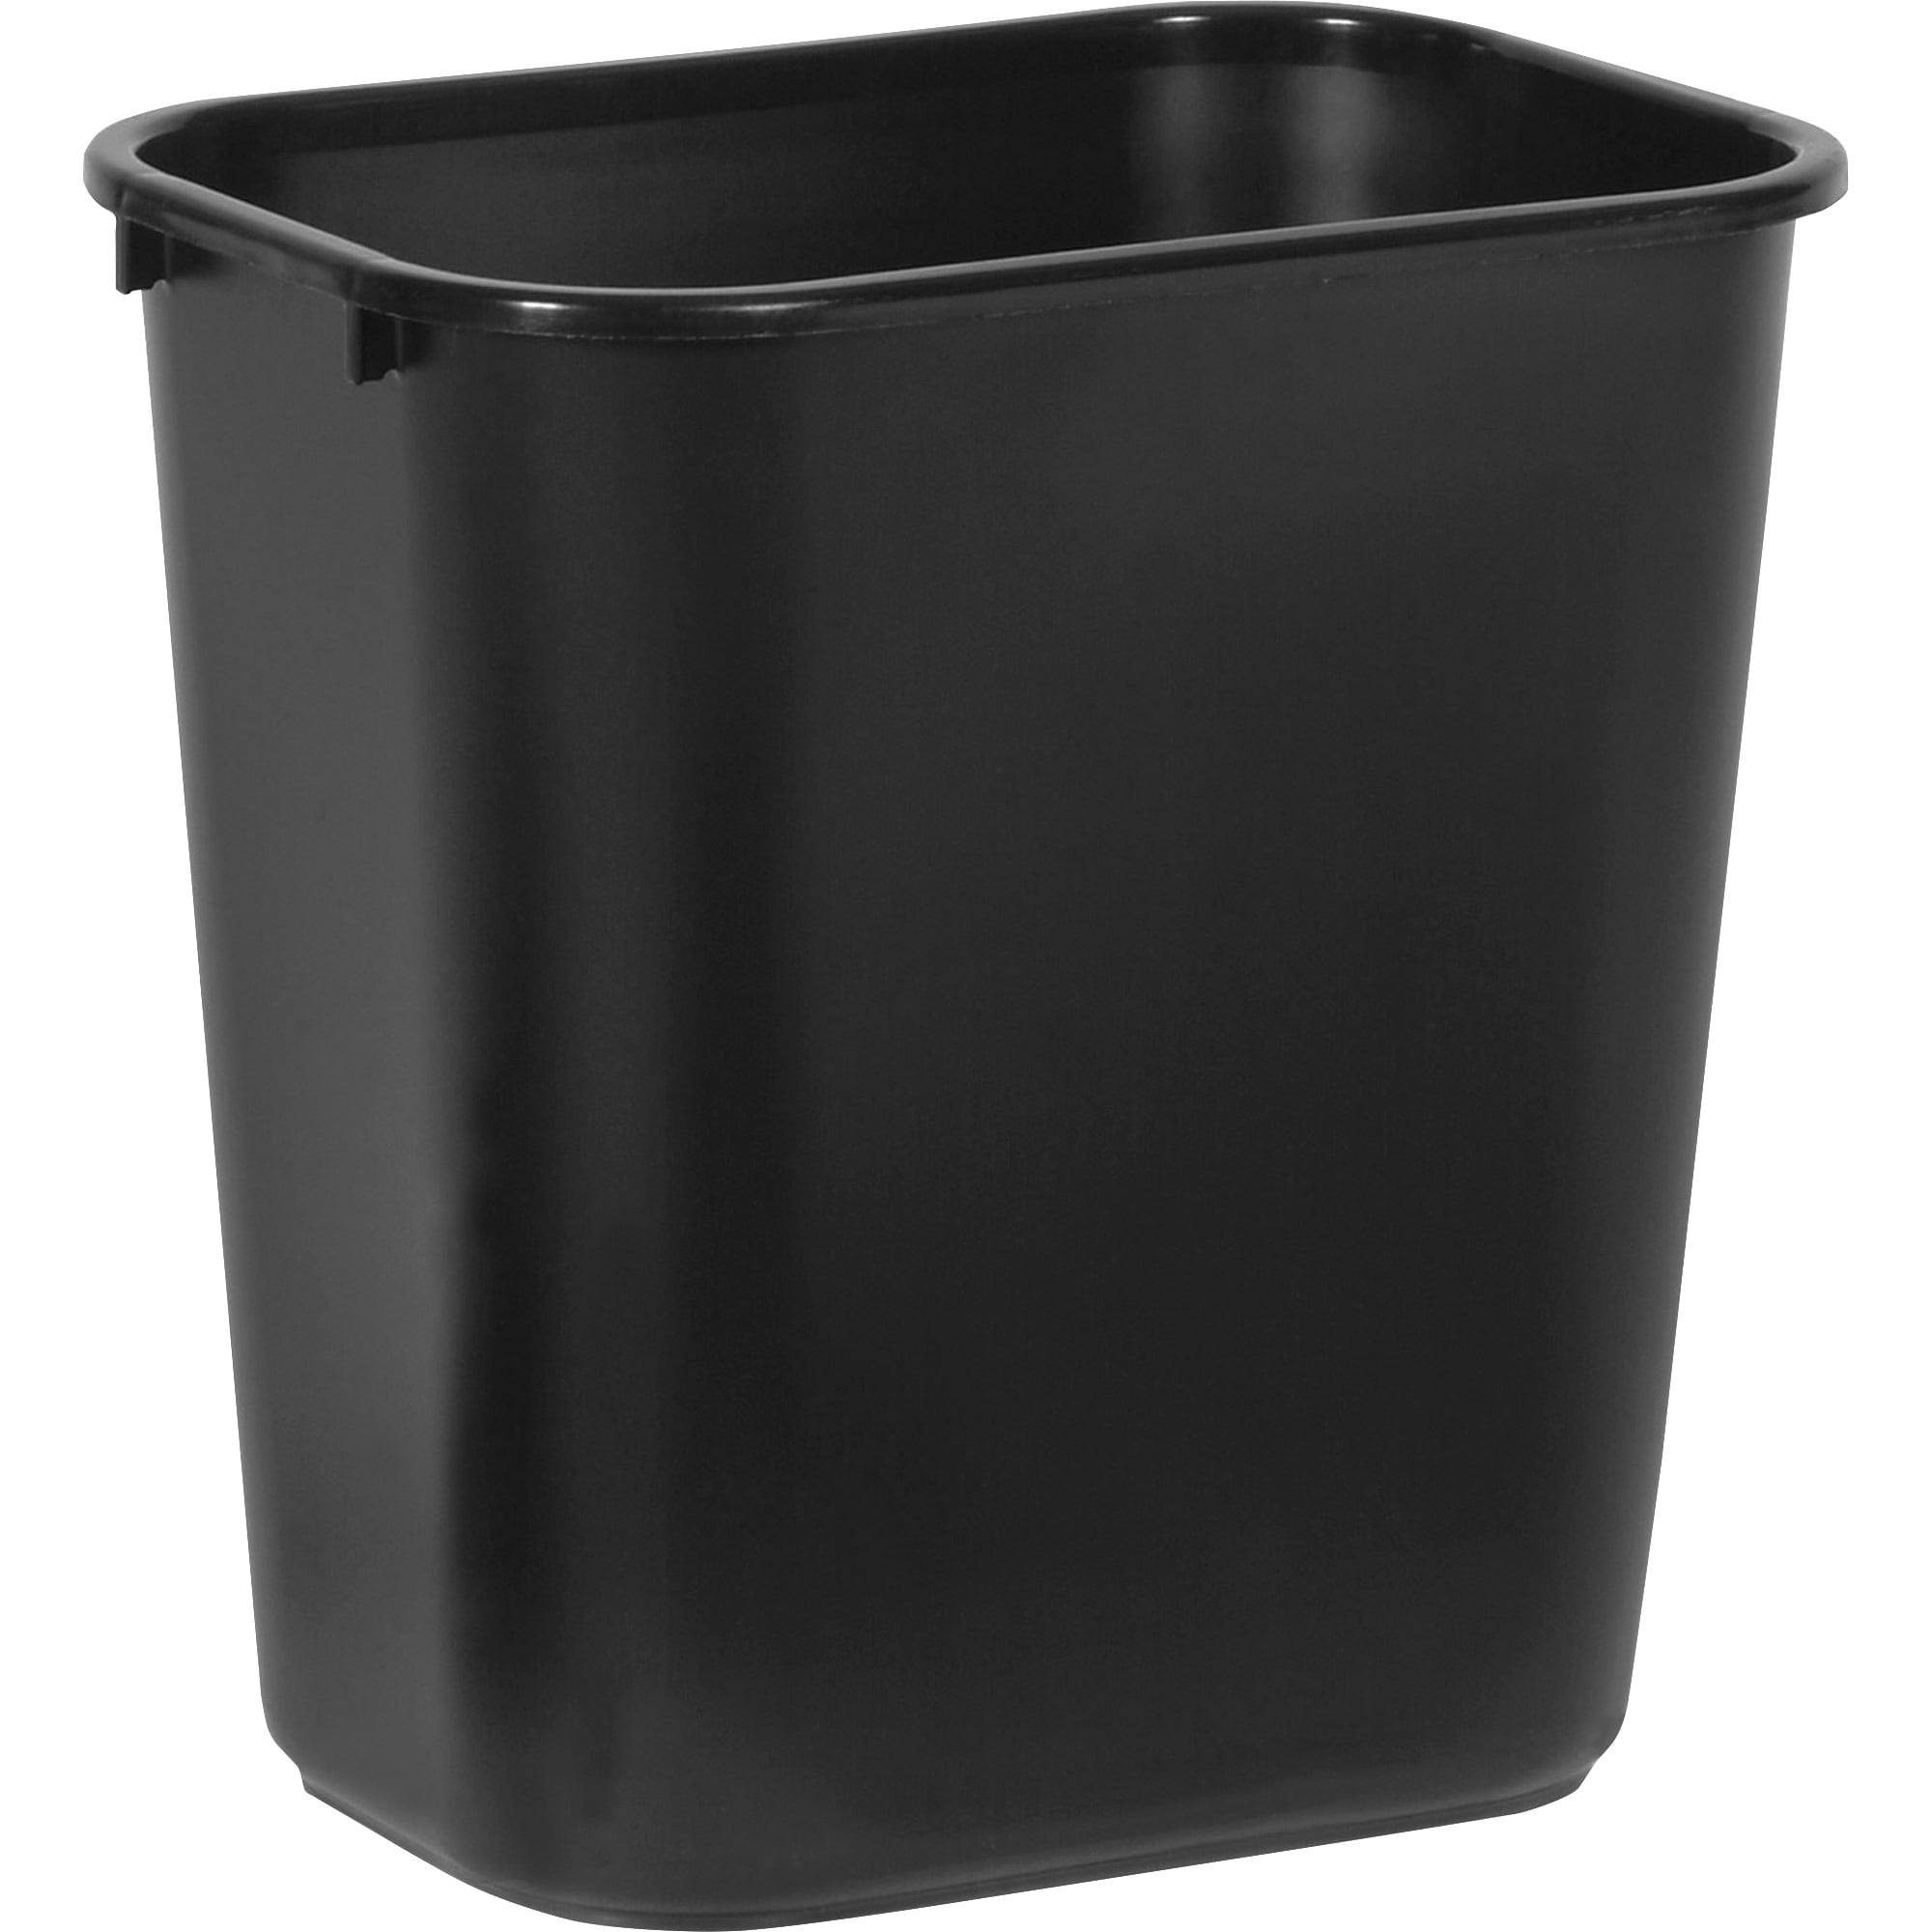 Pack of 12 New Rubbermaid Commercial Rectangular Small Desk side Trash Can 